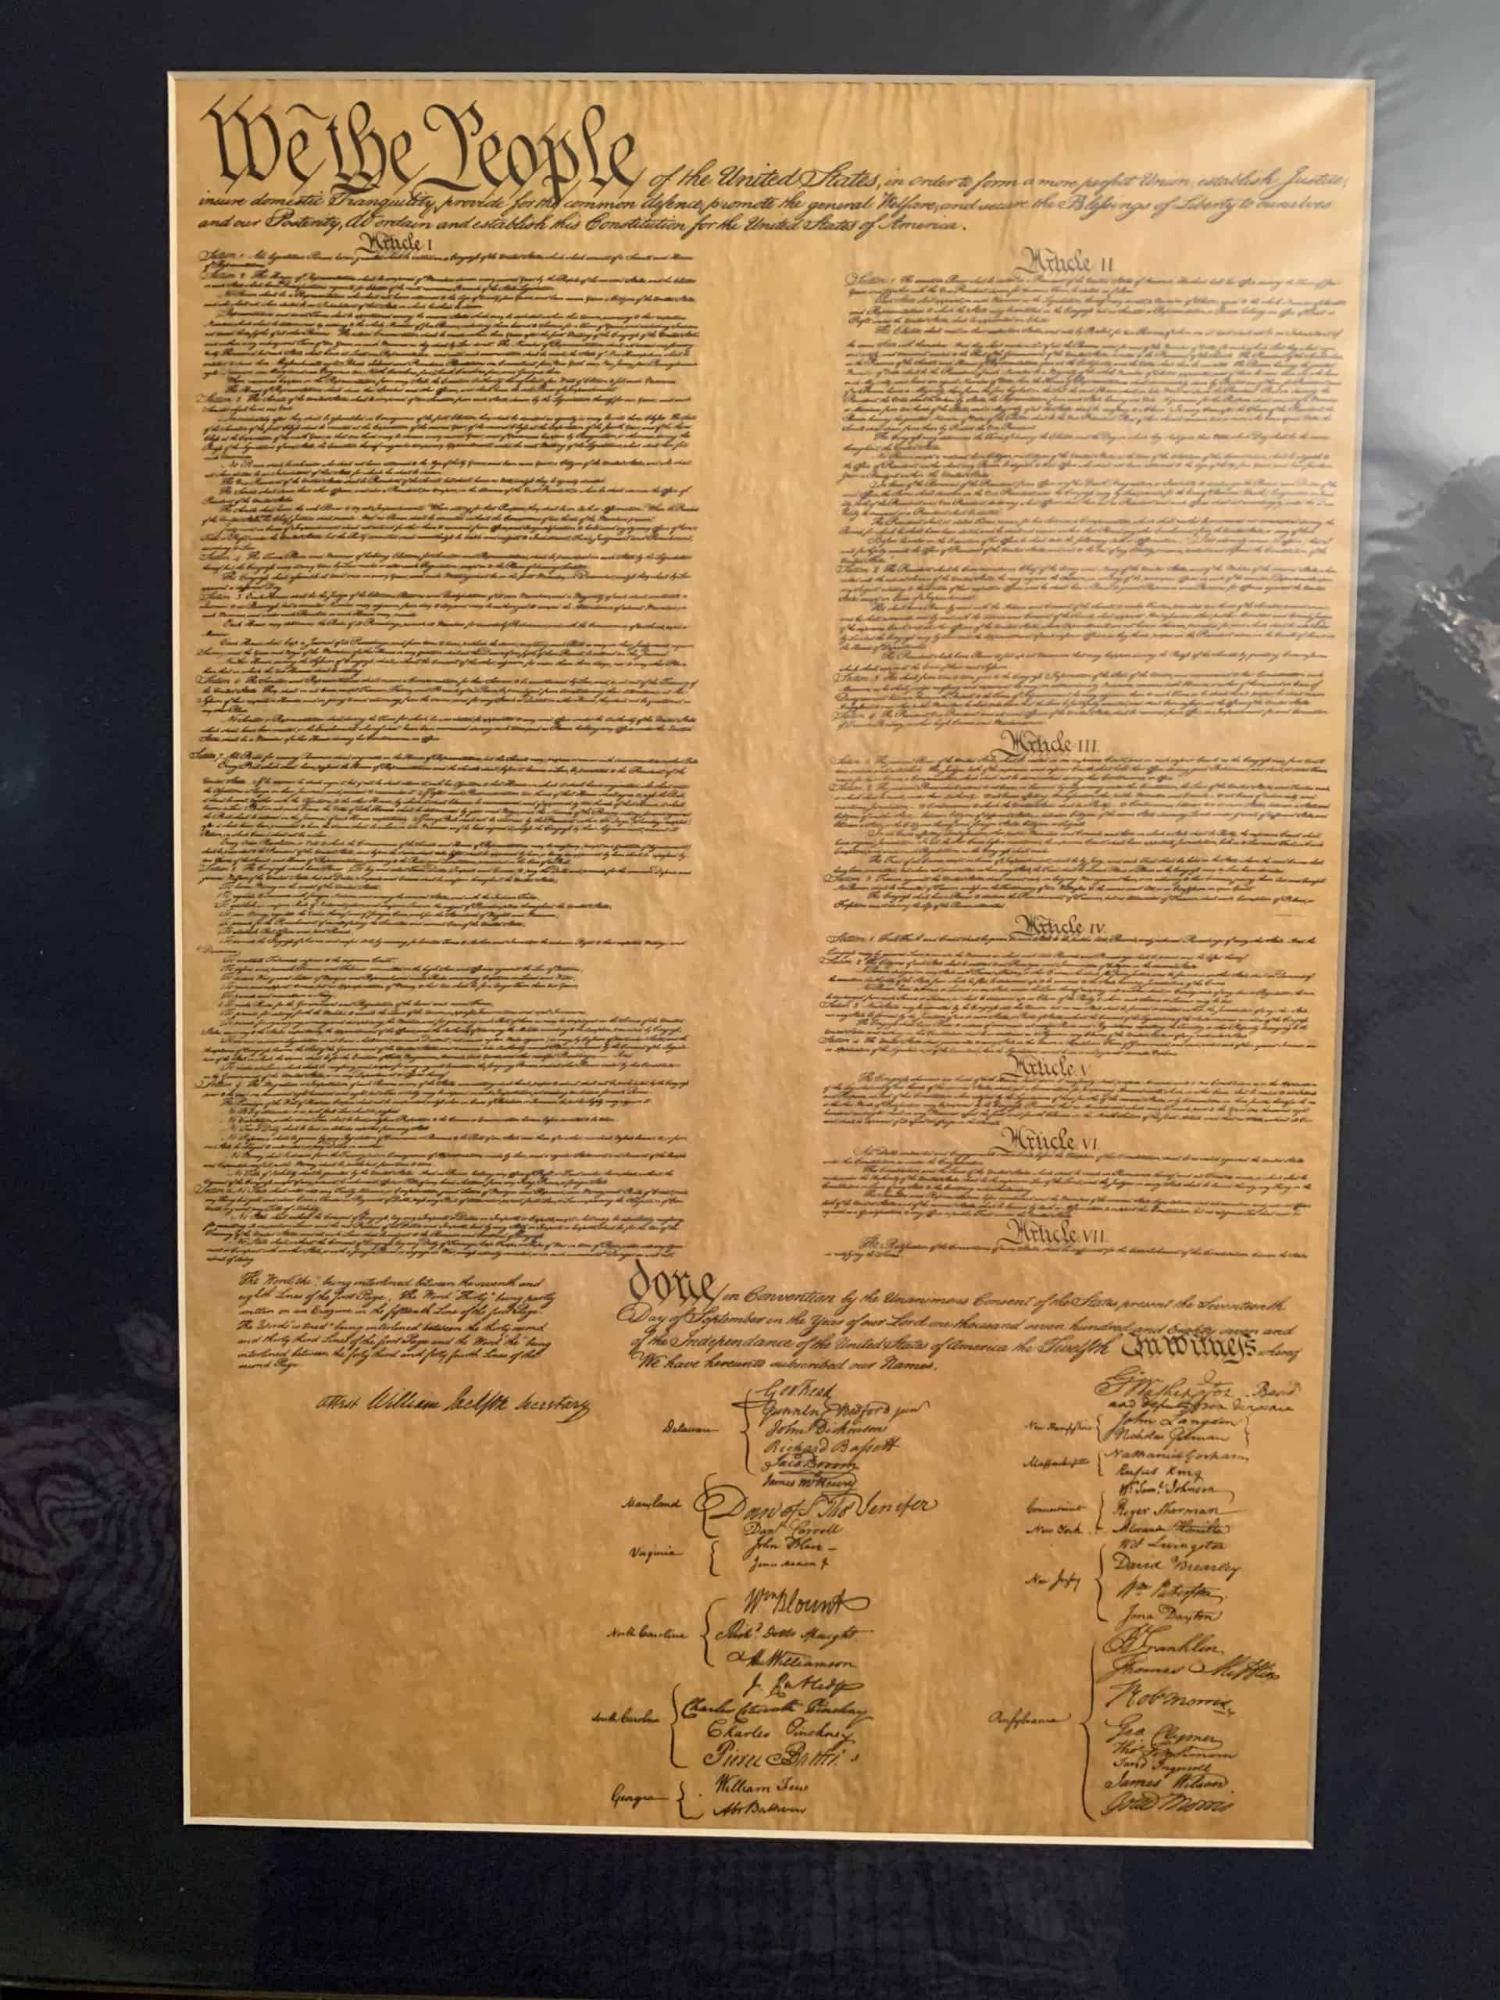 US CONSTITUTION REPLICA ON PARCHMENT MATTED